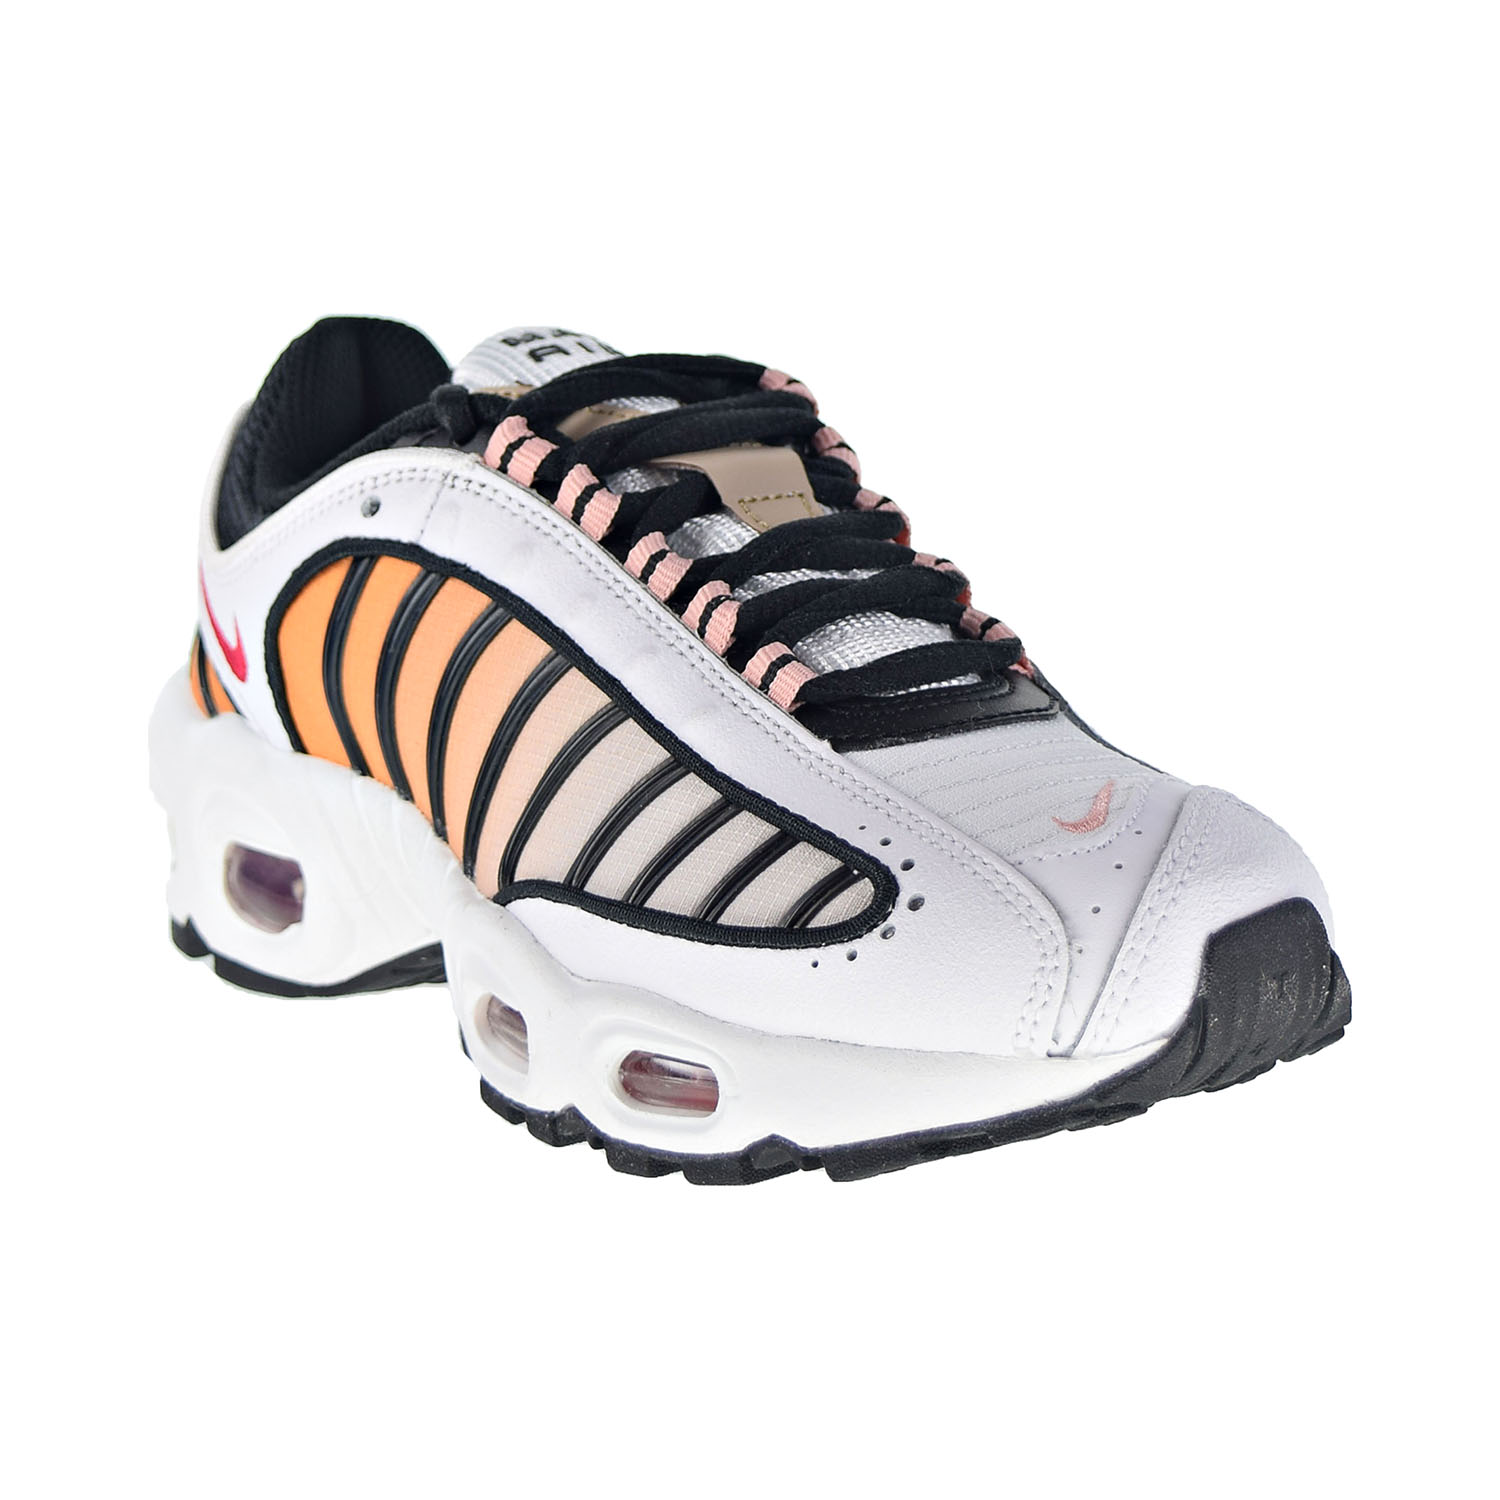 Nike Air Max Tailwind 4 Women's Shoes White-Black-Coral Stardust-Gym Red cj7976-100 - image 2 of 6